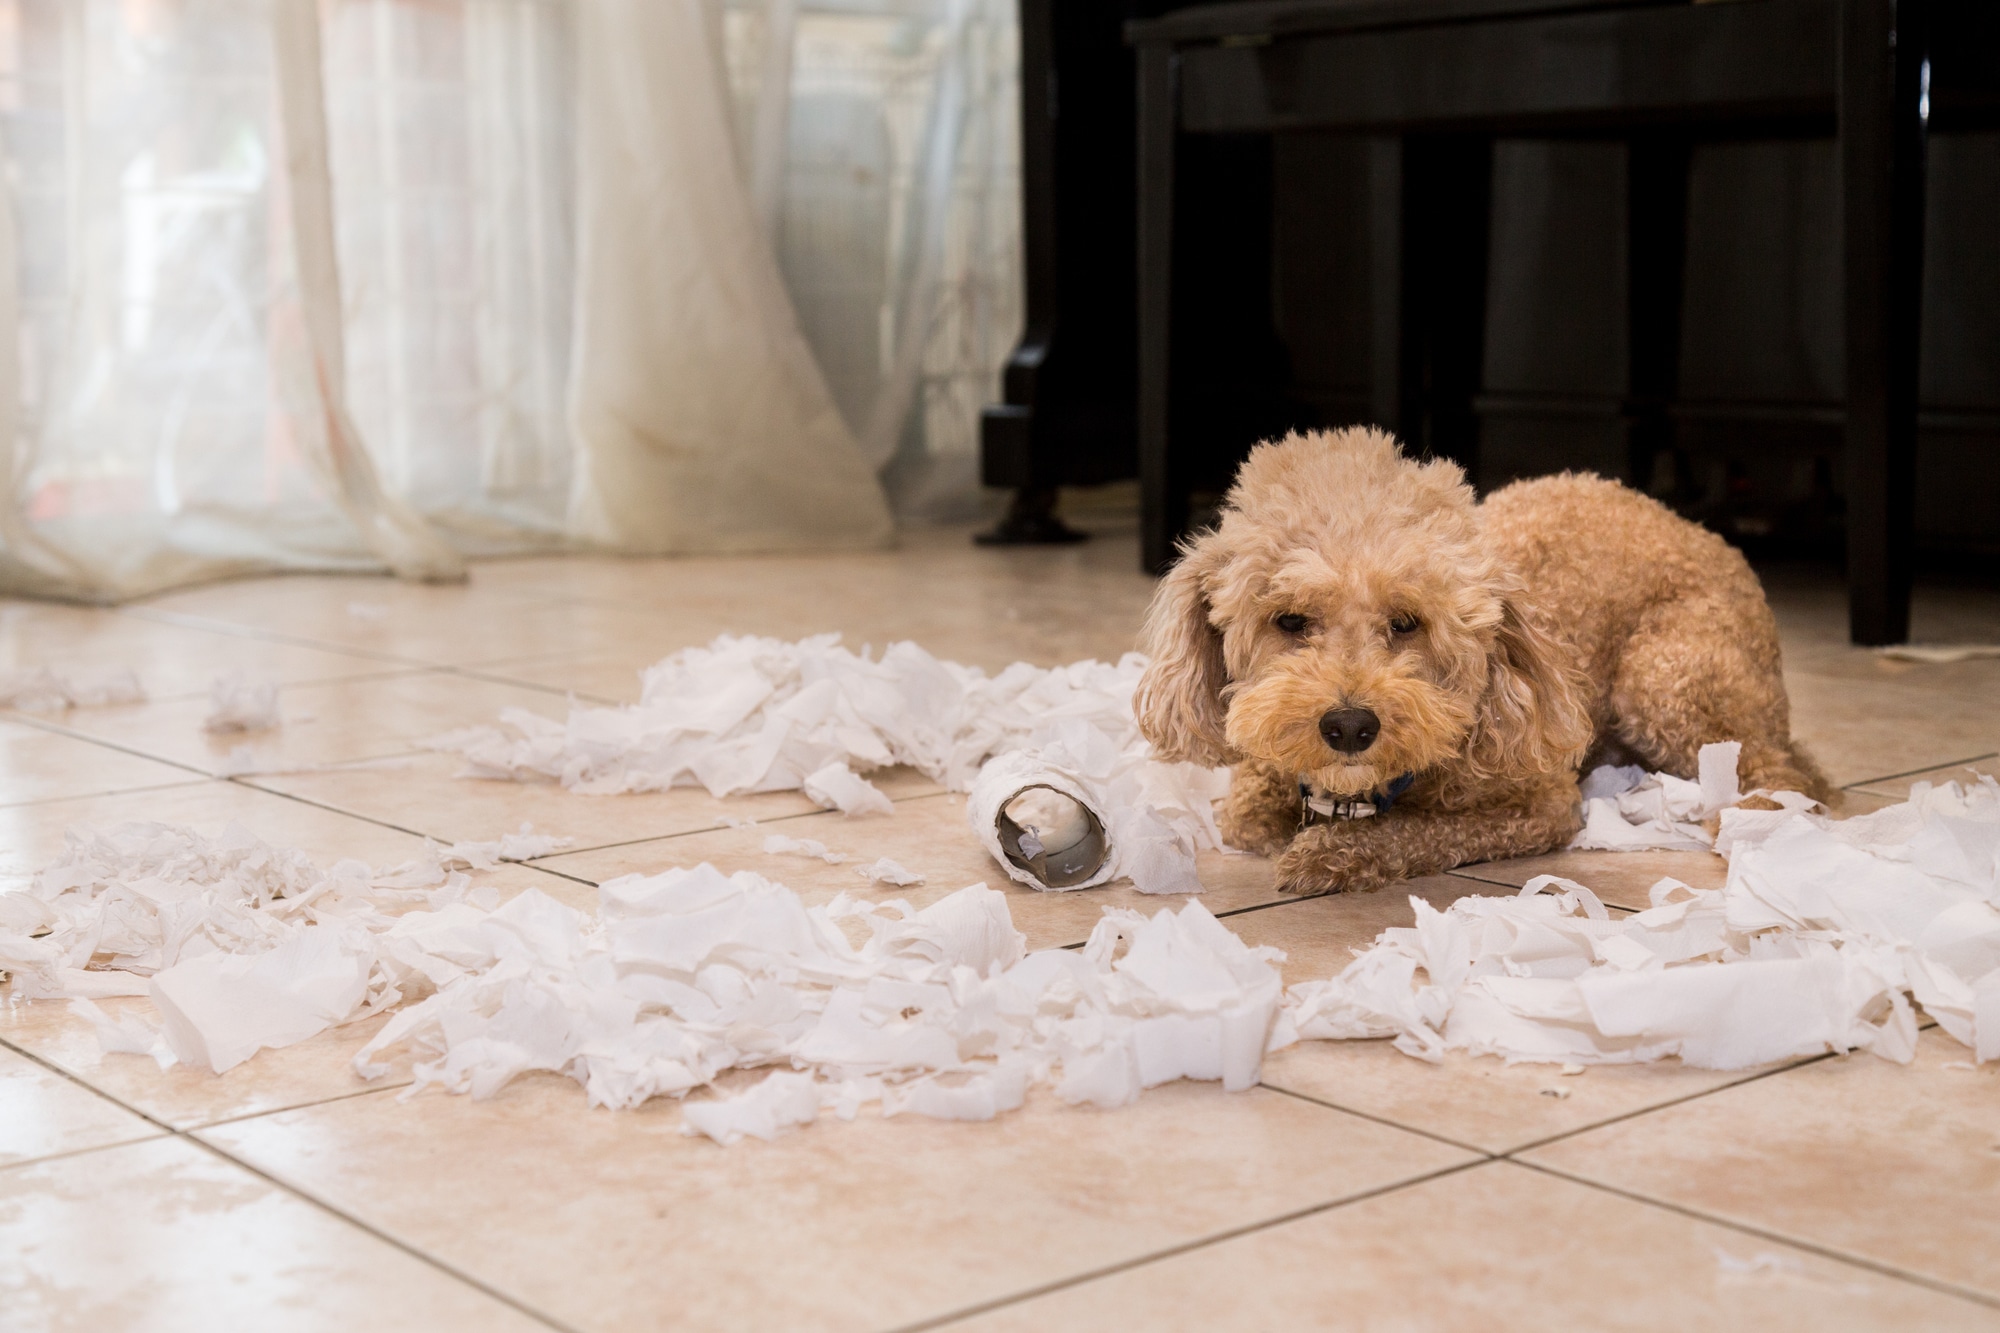 How To Get Your Puppy To Stop Ripping Up Their Potty Pads